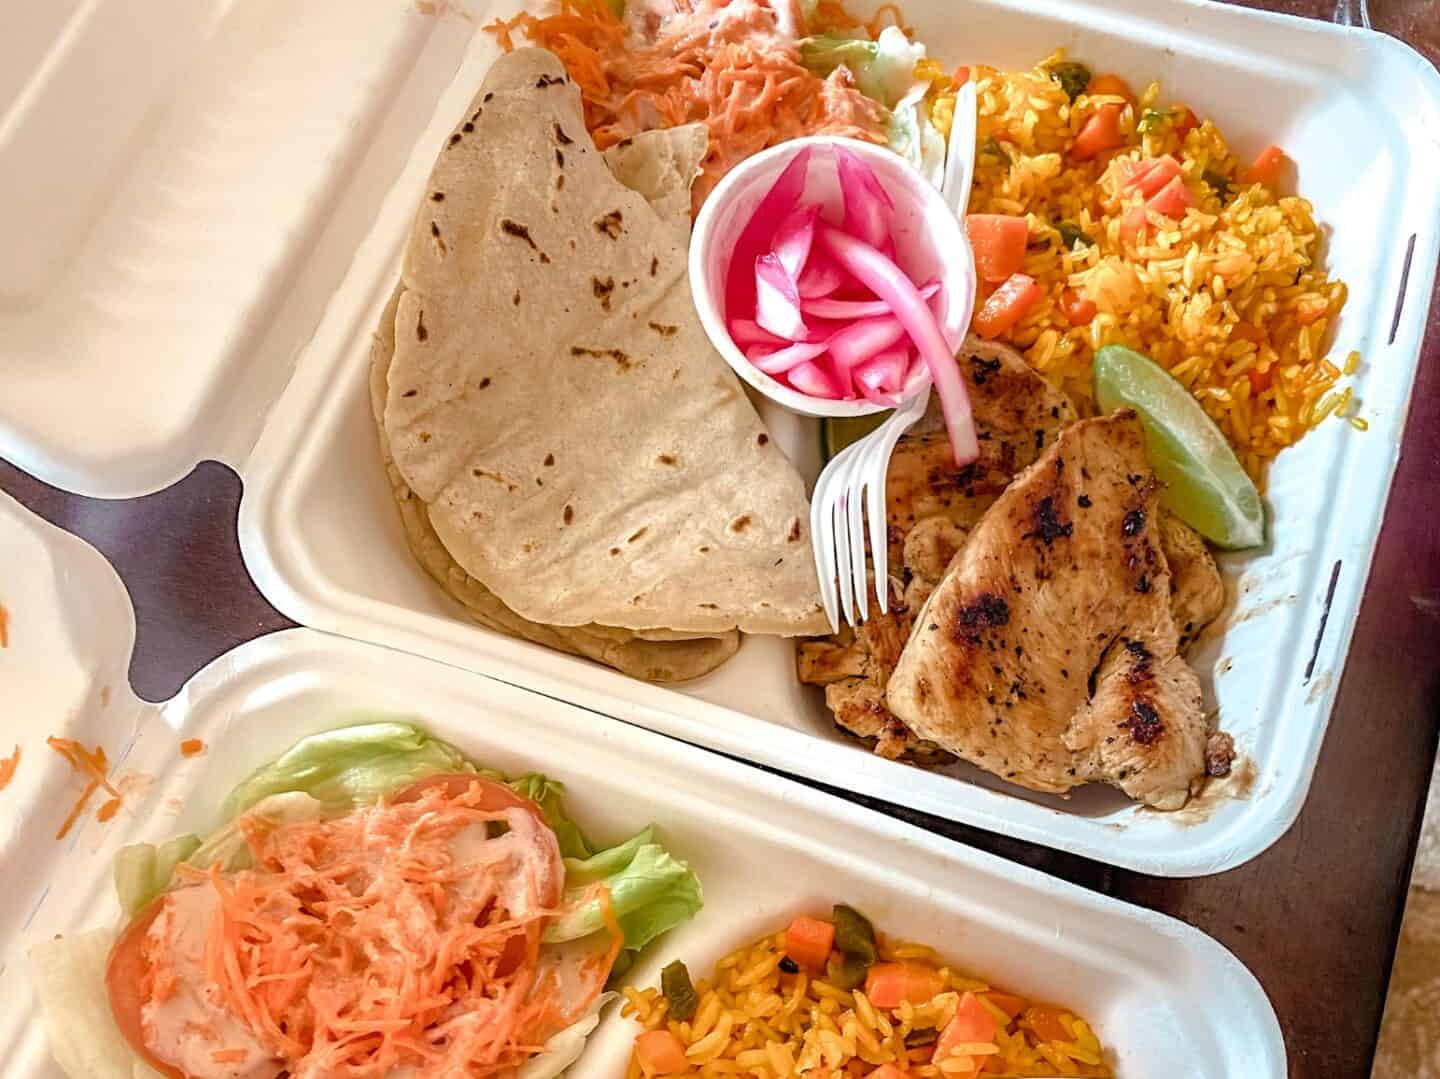 Two heaping take-out containers filled with jerk chicken, tortillas, rice and beans